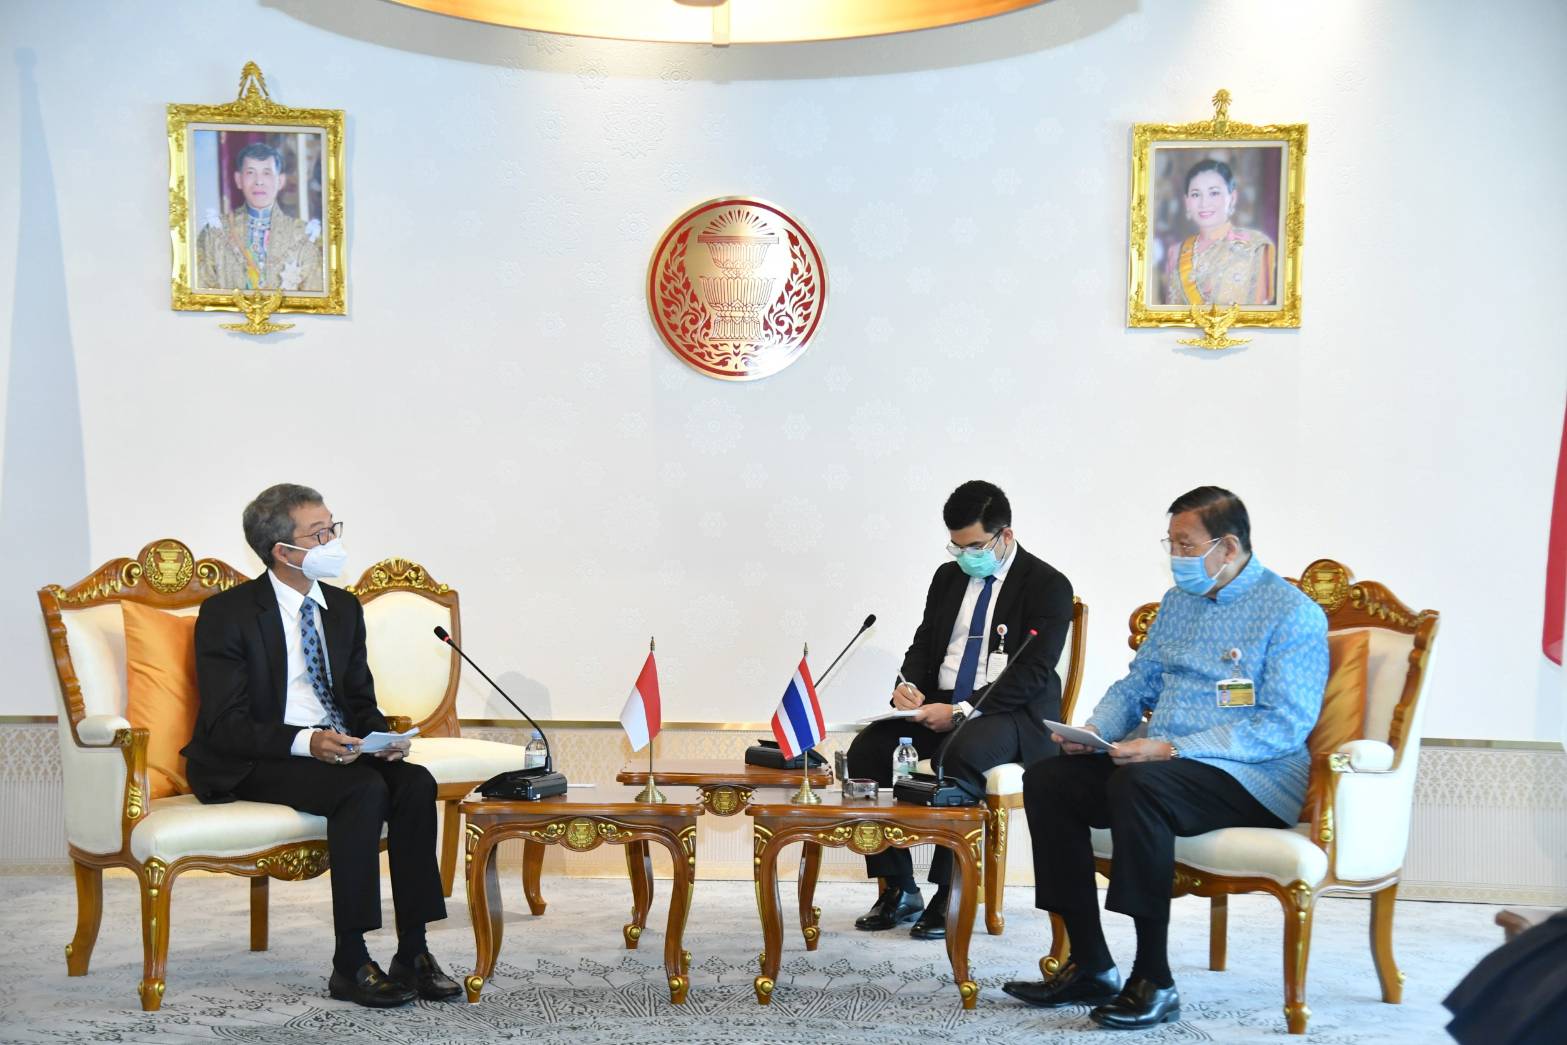 H.E. Mr. Rachmat Budiman Ambassador of the Republic of Indonesia to Thailand Paid a Courtesy Call on the President of the Senate (Tuesday 14th June 2022)